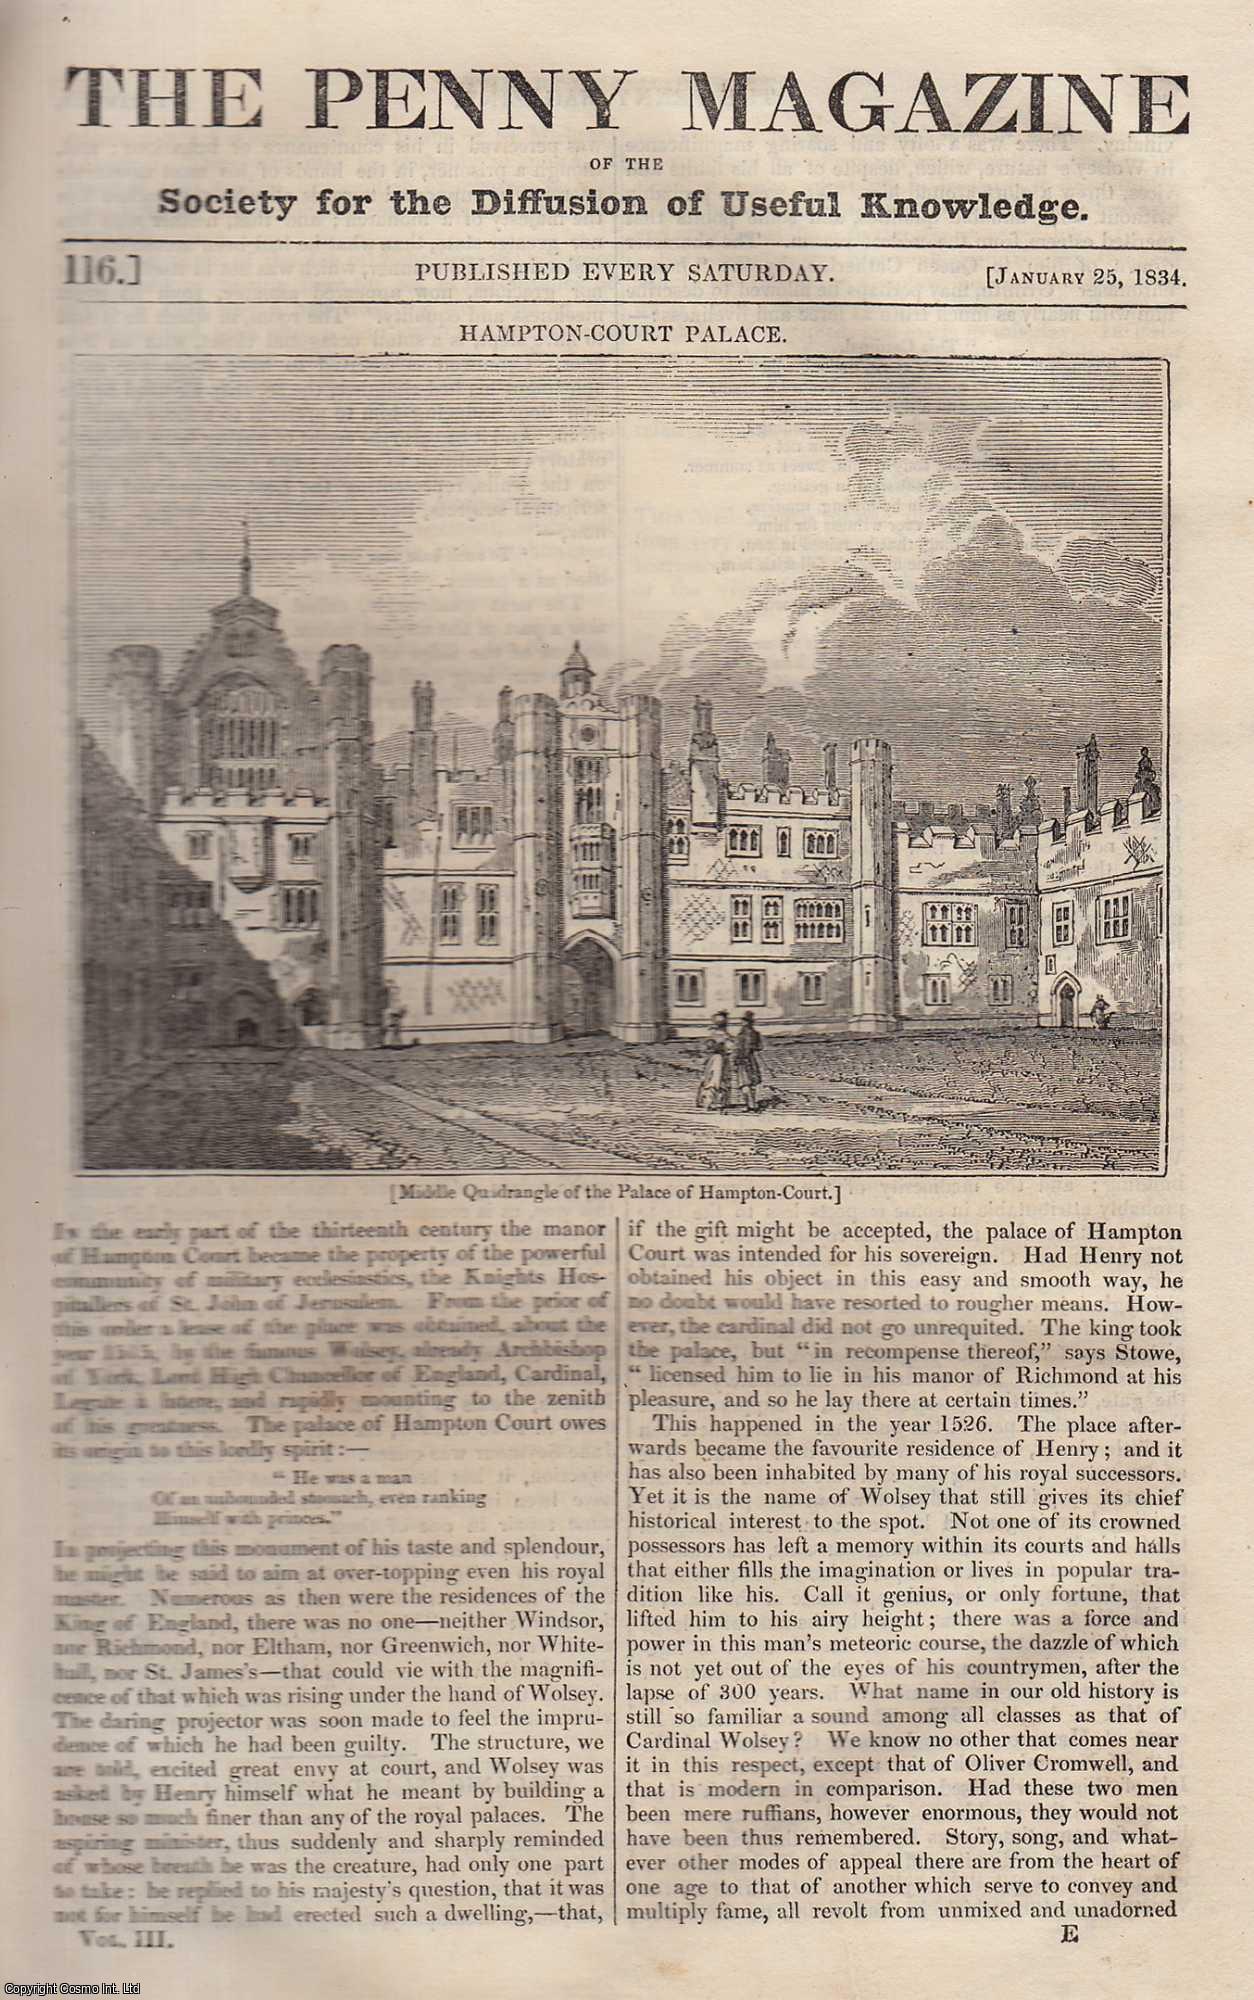 Penny Magazine - Hampton-Court Palace; Volcanic Island off The Azores; Shakespeare's Cliff, Dover; The Chetah, or Hunting Leopard, etc. Issue No. 116, January 25th, 1834. A complete original weekly issue of the Penny Magazine, 1834.